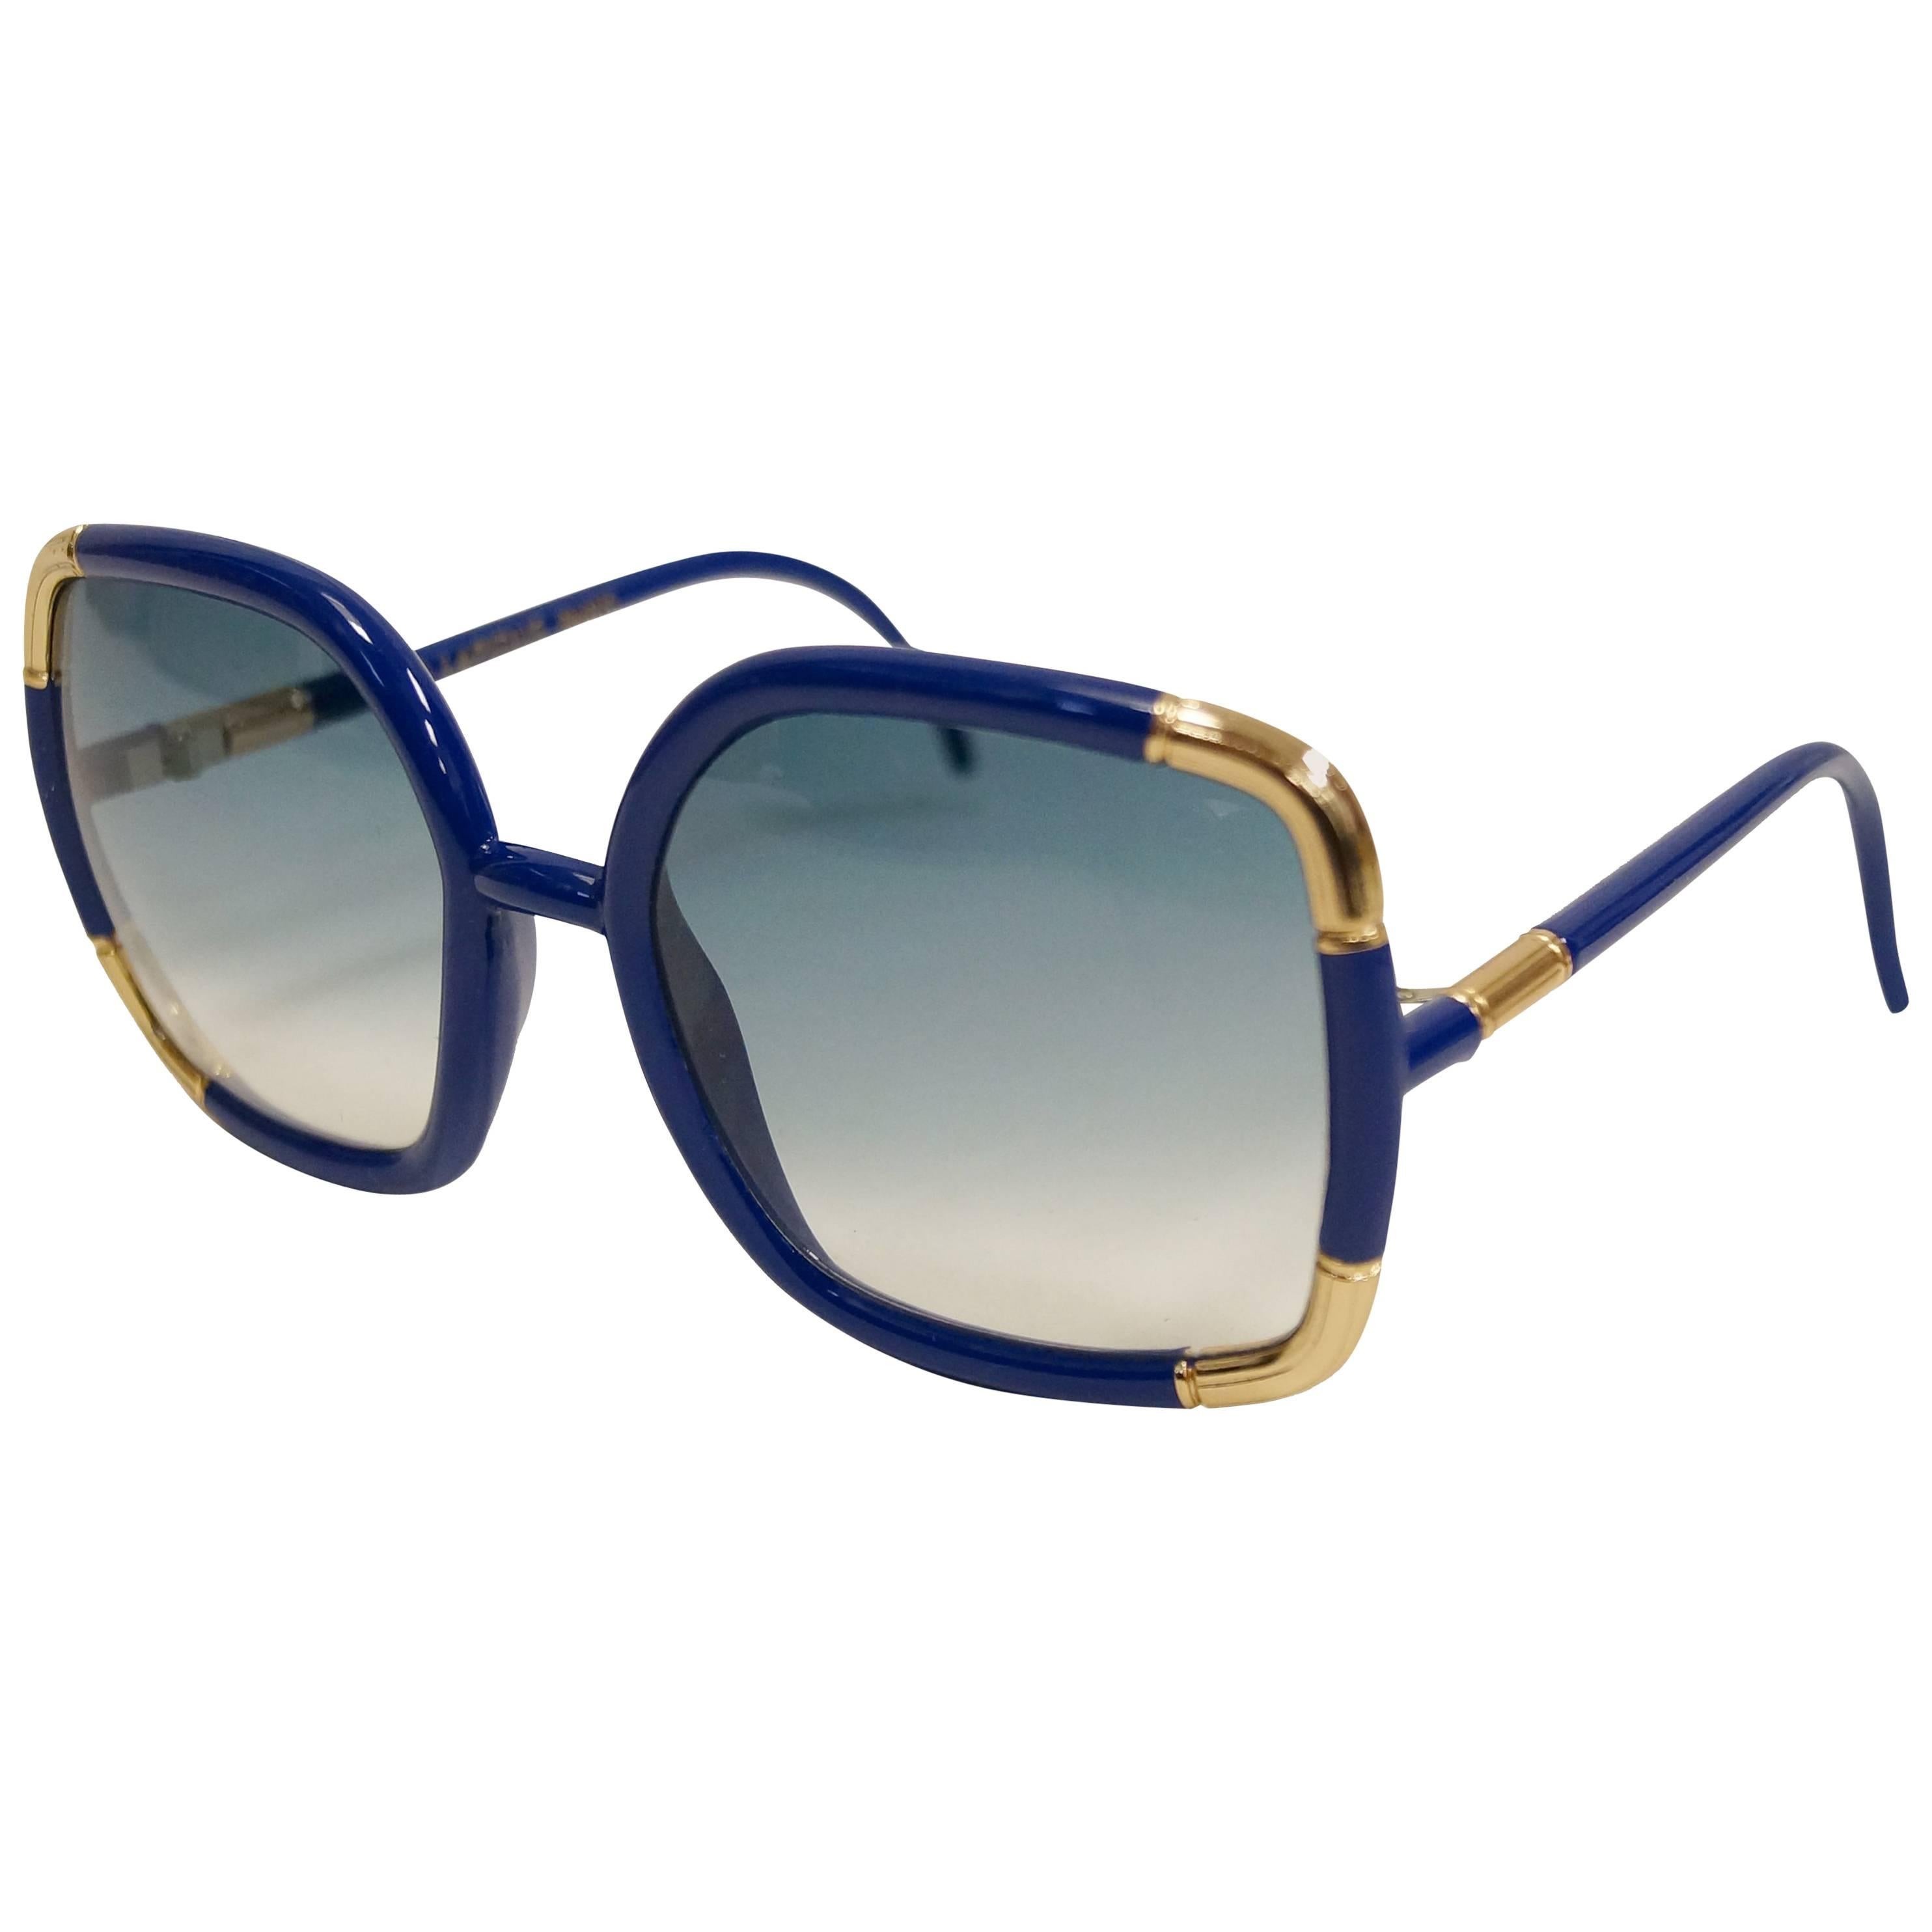 Ted Lapidus Sunglasses Framed in Royal Blue and Gold, 1970s  